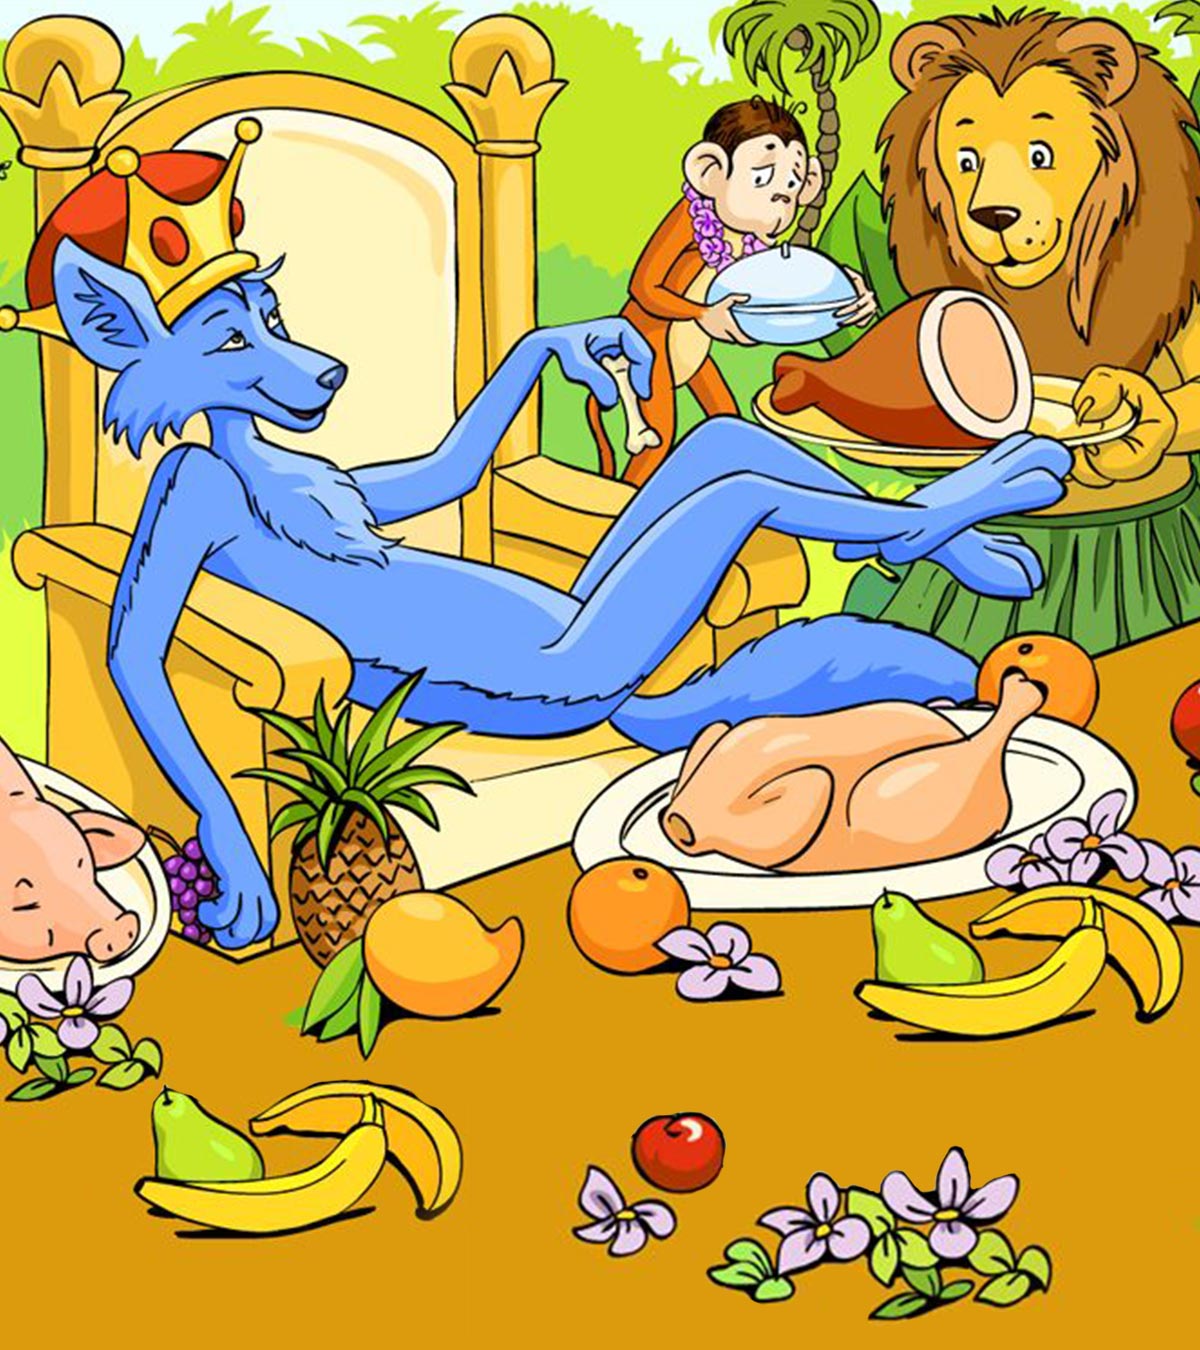 'The Blue Jackal Story & Moral' For Your Kid